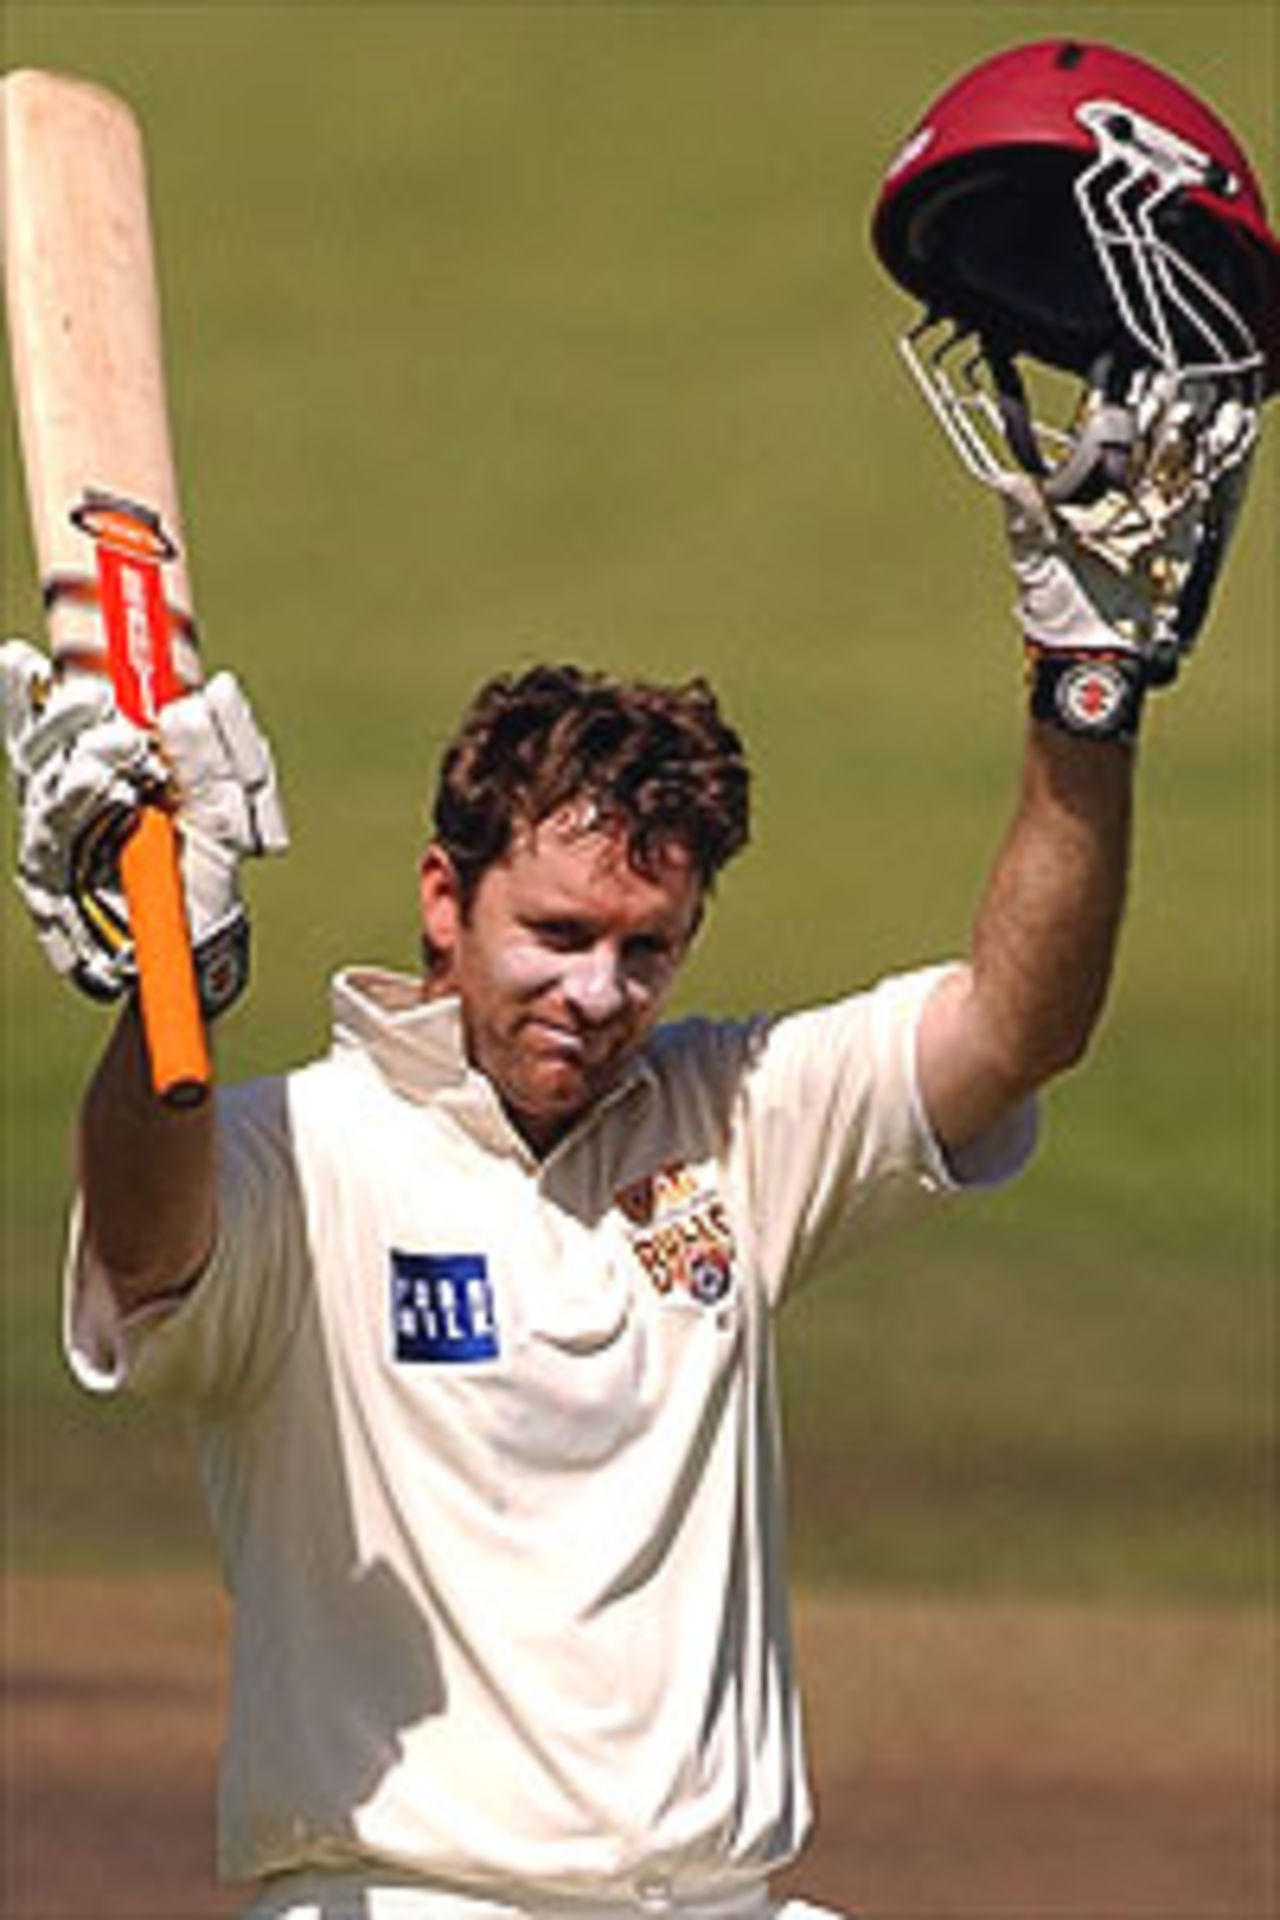 Martin Love of Queensland celebrates his double century during the Pura Cup Cricket match between the Victorian Bushrangers and Queensland Bulls at the Junction Oval November 13, 2003 in Melbourne, Australia.